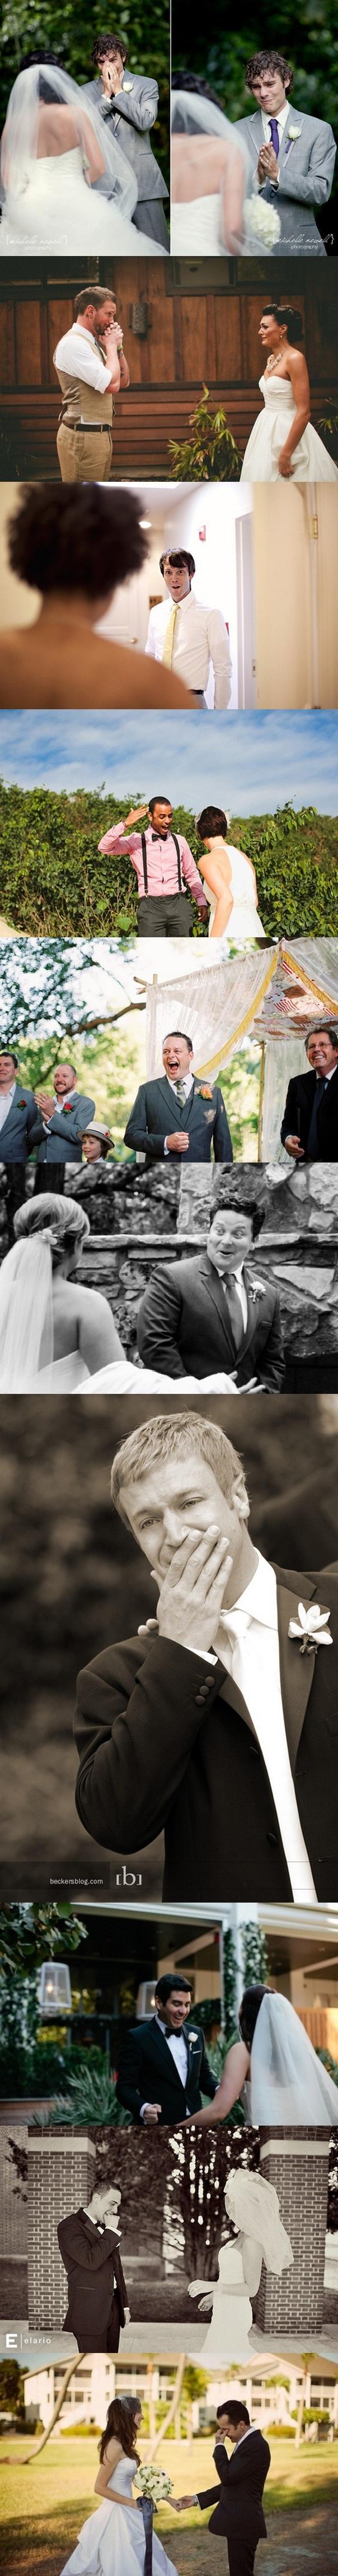 Men's Reactions To Their Brides On Their Wedding Day. -   Misc